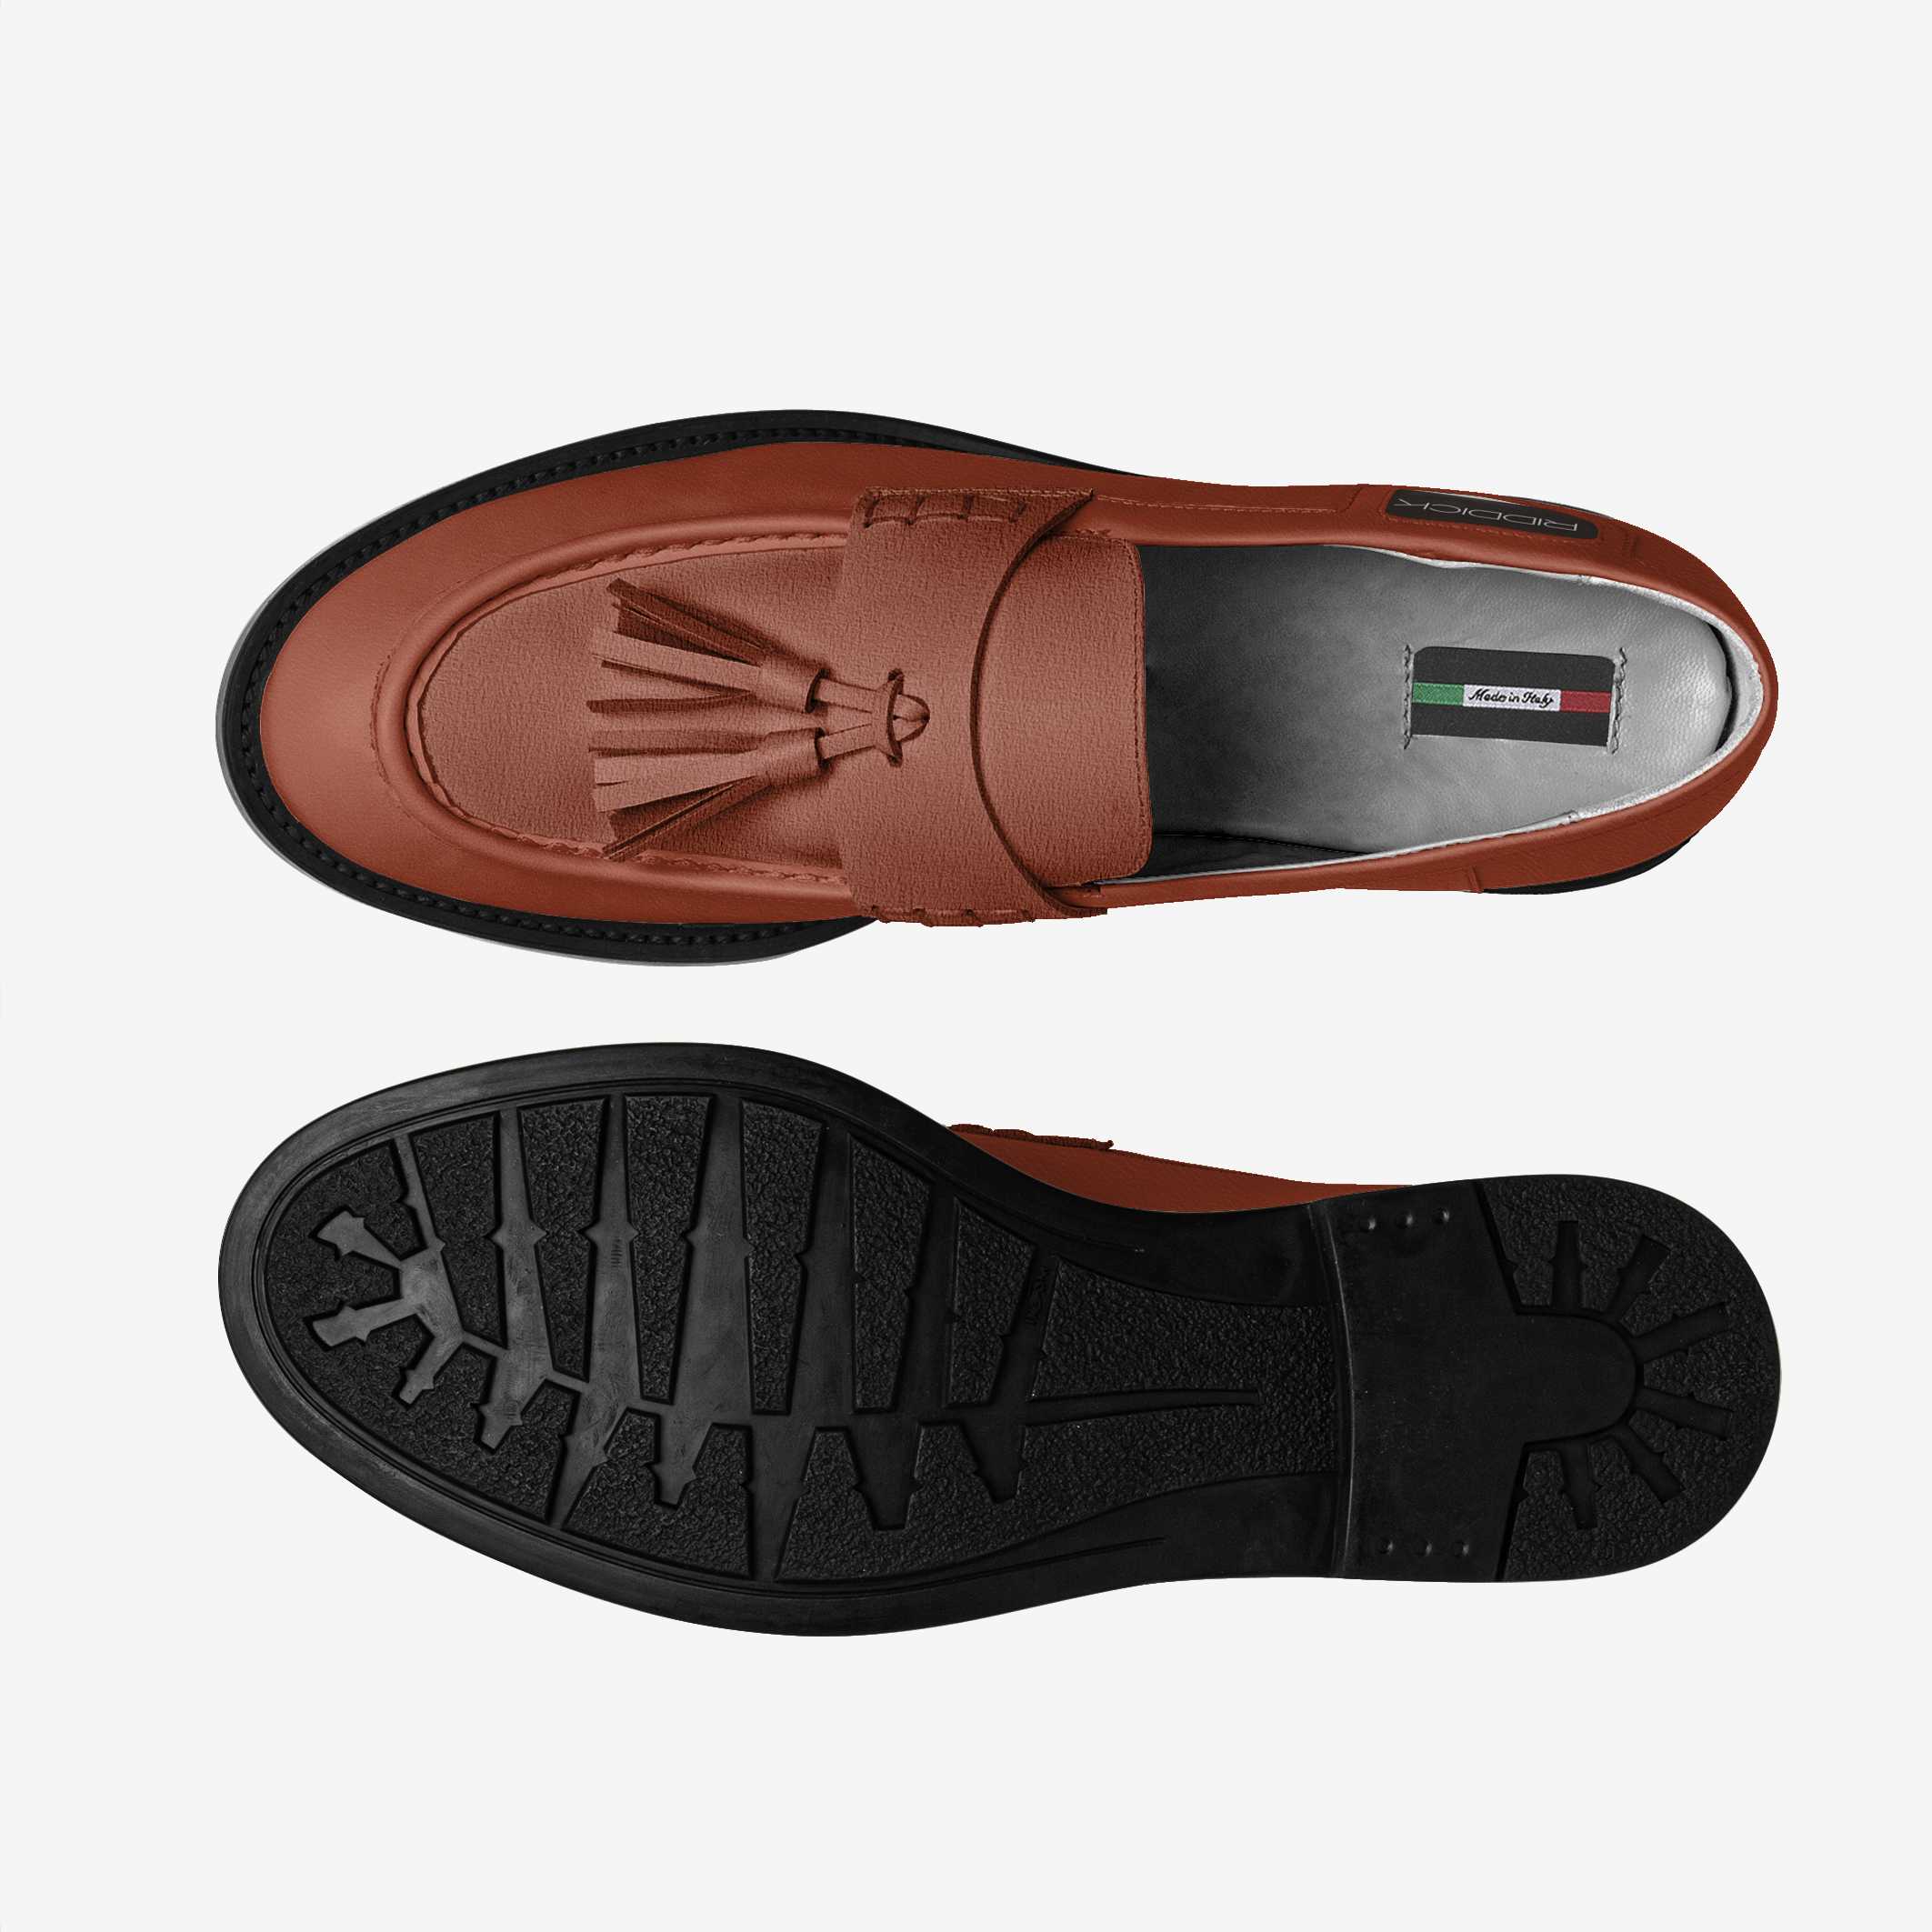 EXEC, THE TASSEL (IN ROASTED PEANUT) - Riddick Shoes Shoe Riddick Shoes   